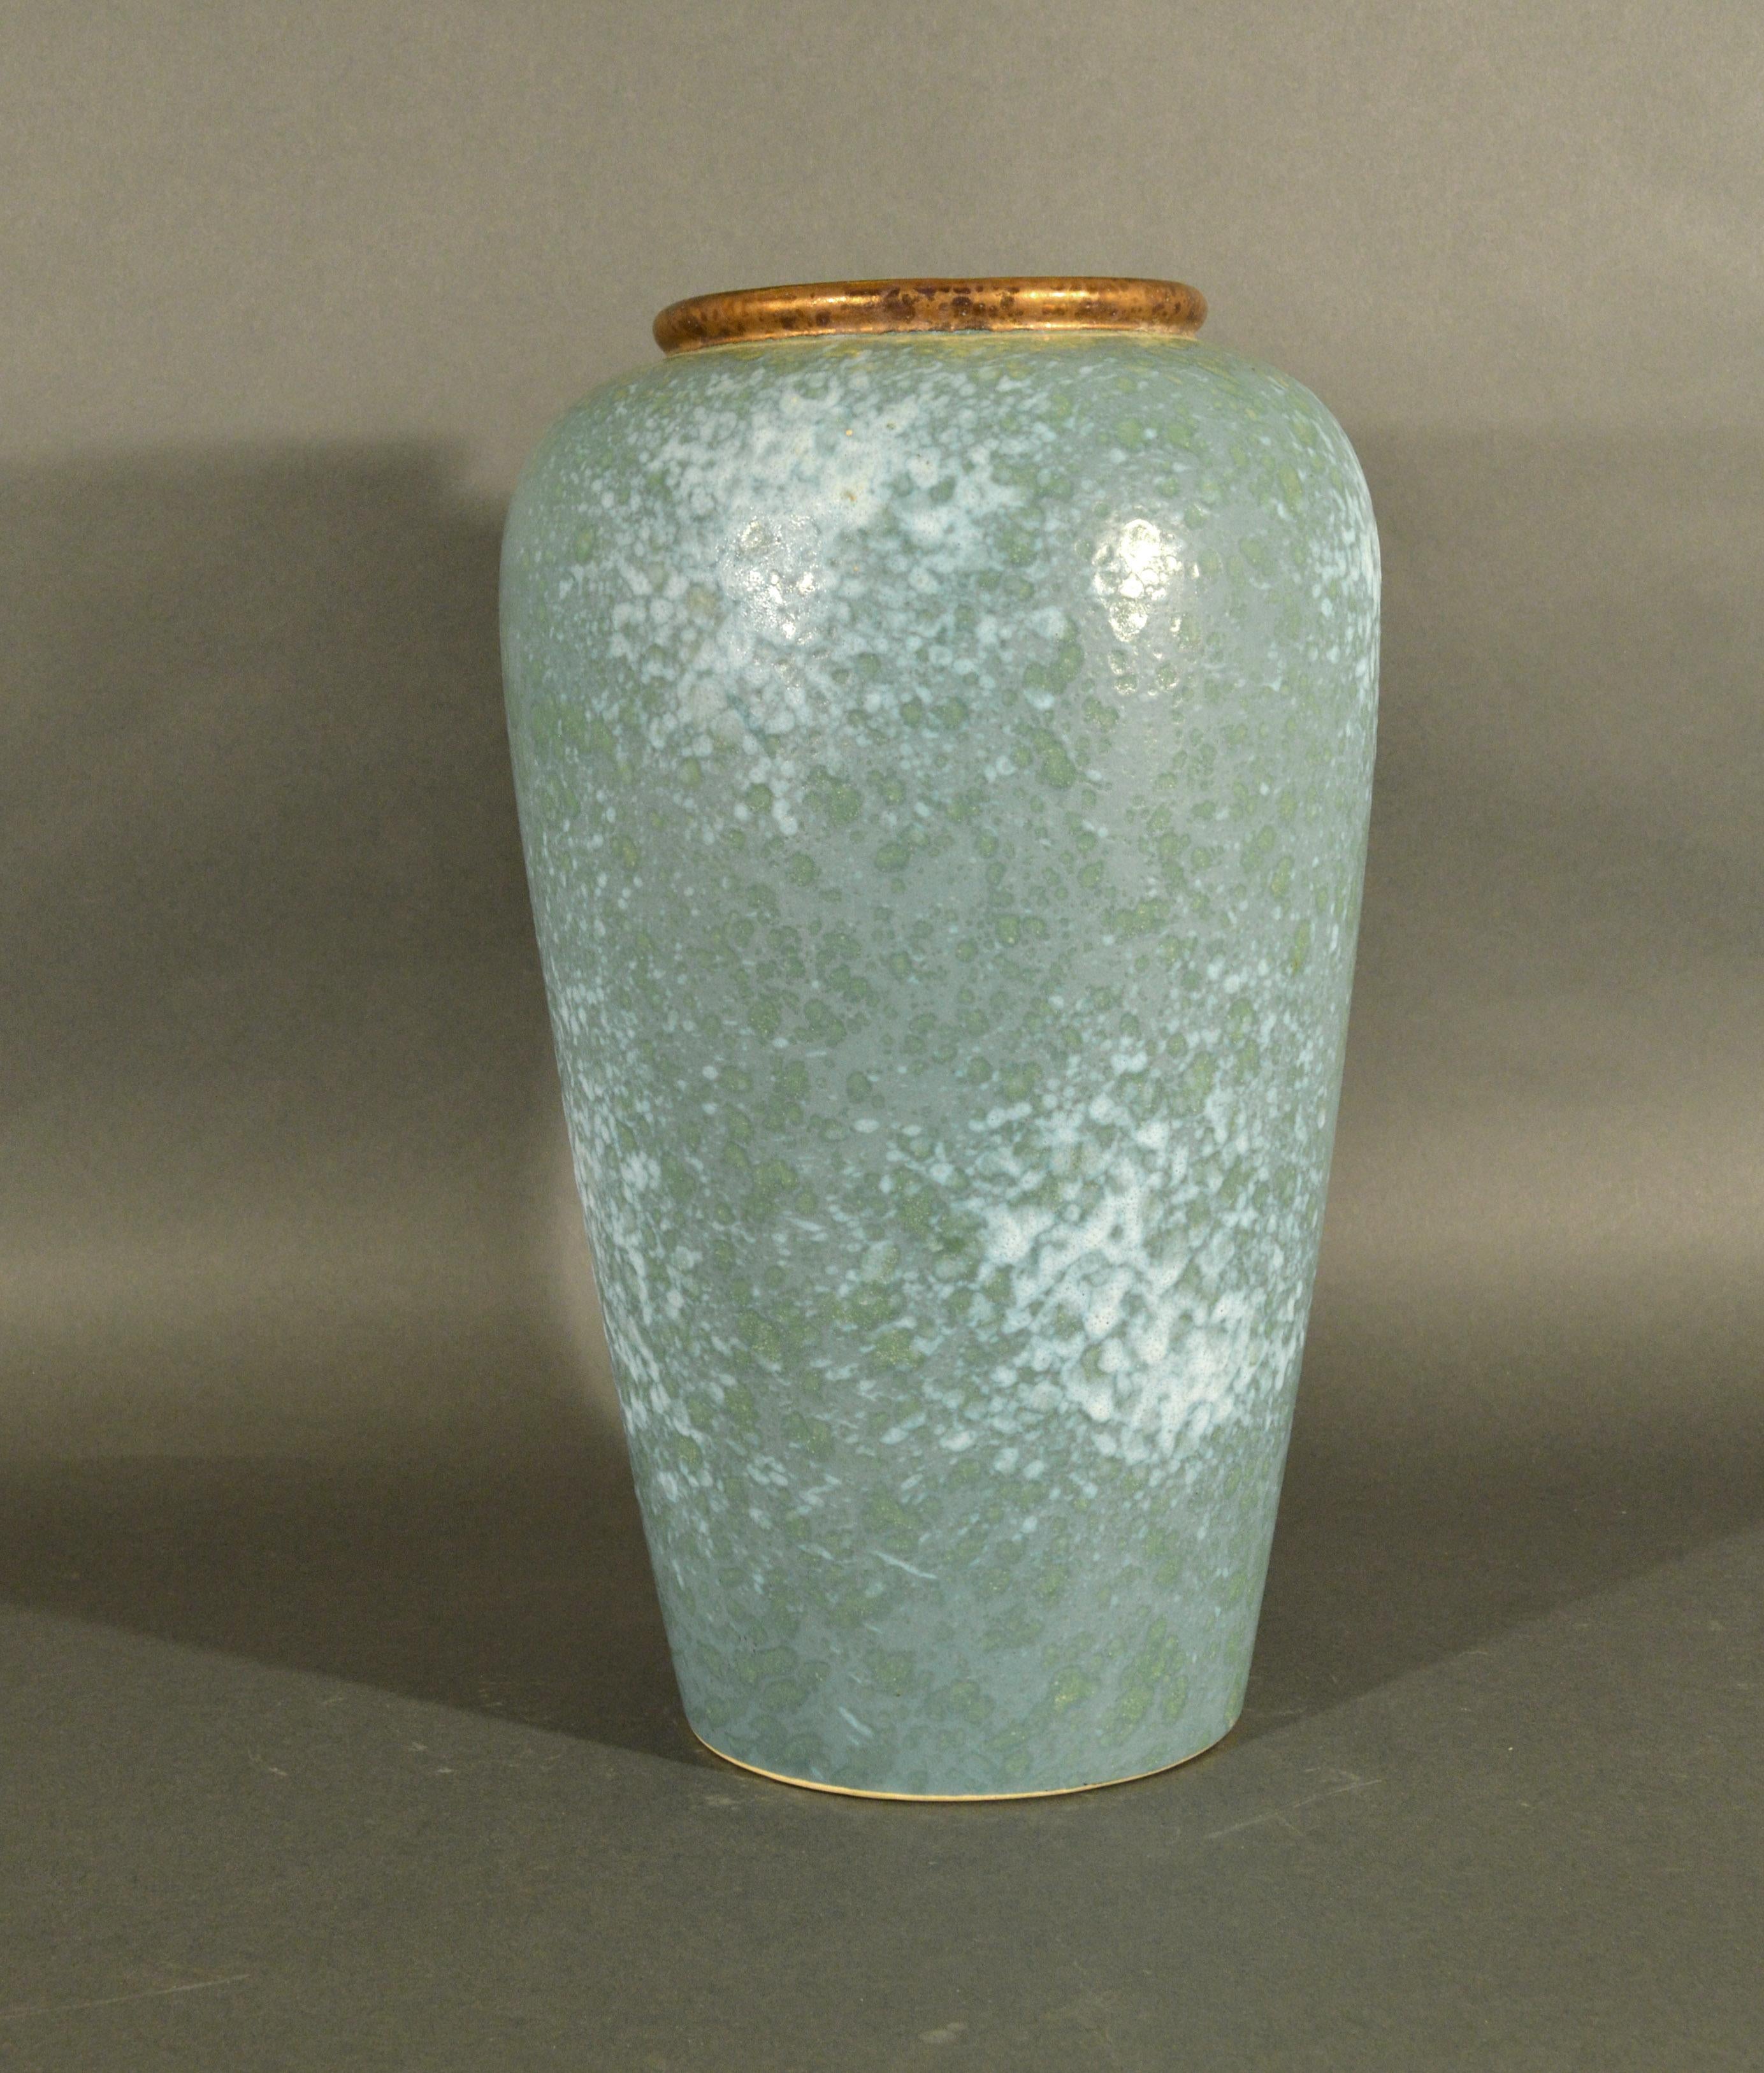 Vintage German Mid-Century Modern art pottery vase,
Scheurich Keramik,
Germany,
Early 1970s.
(NY9380-Xur)

A Sheurich tall floor vase faux-stone glaze.

Mark: Mold-marked with the Scheurich mark in the center of the bottom, surrounded by W.